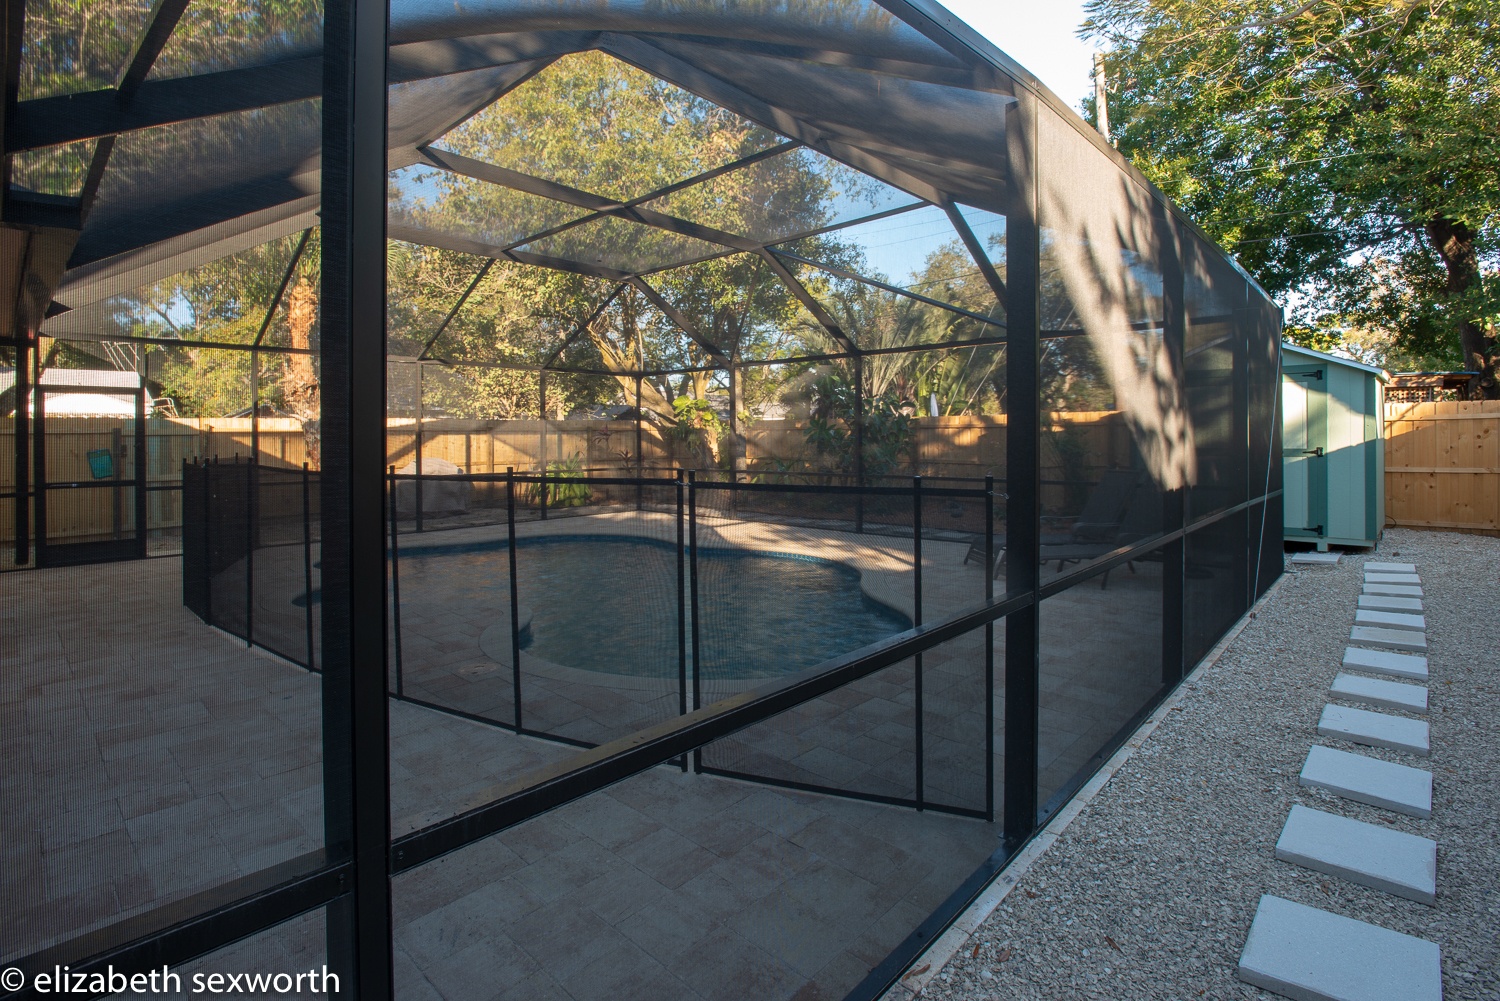 Caged pool